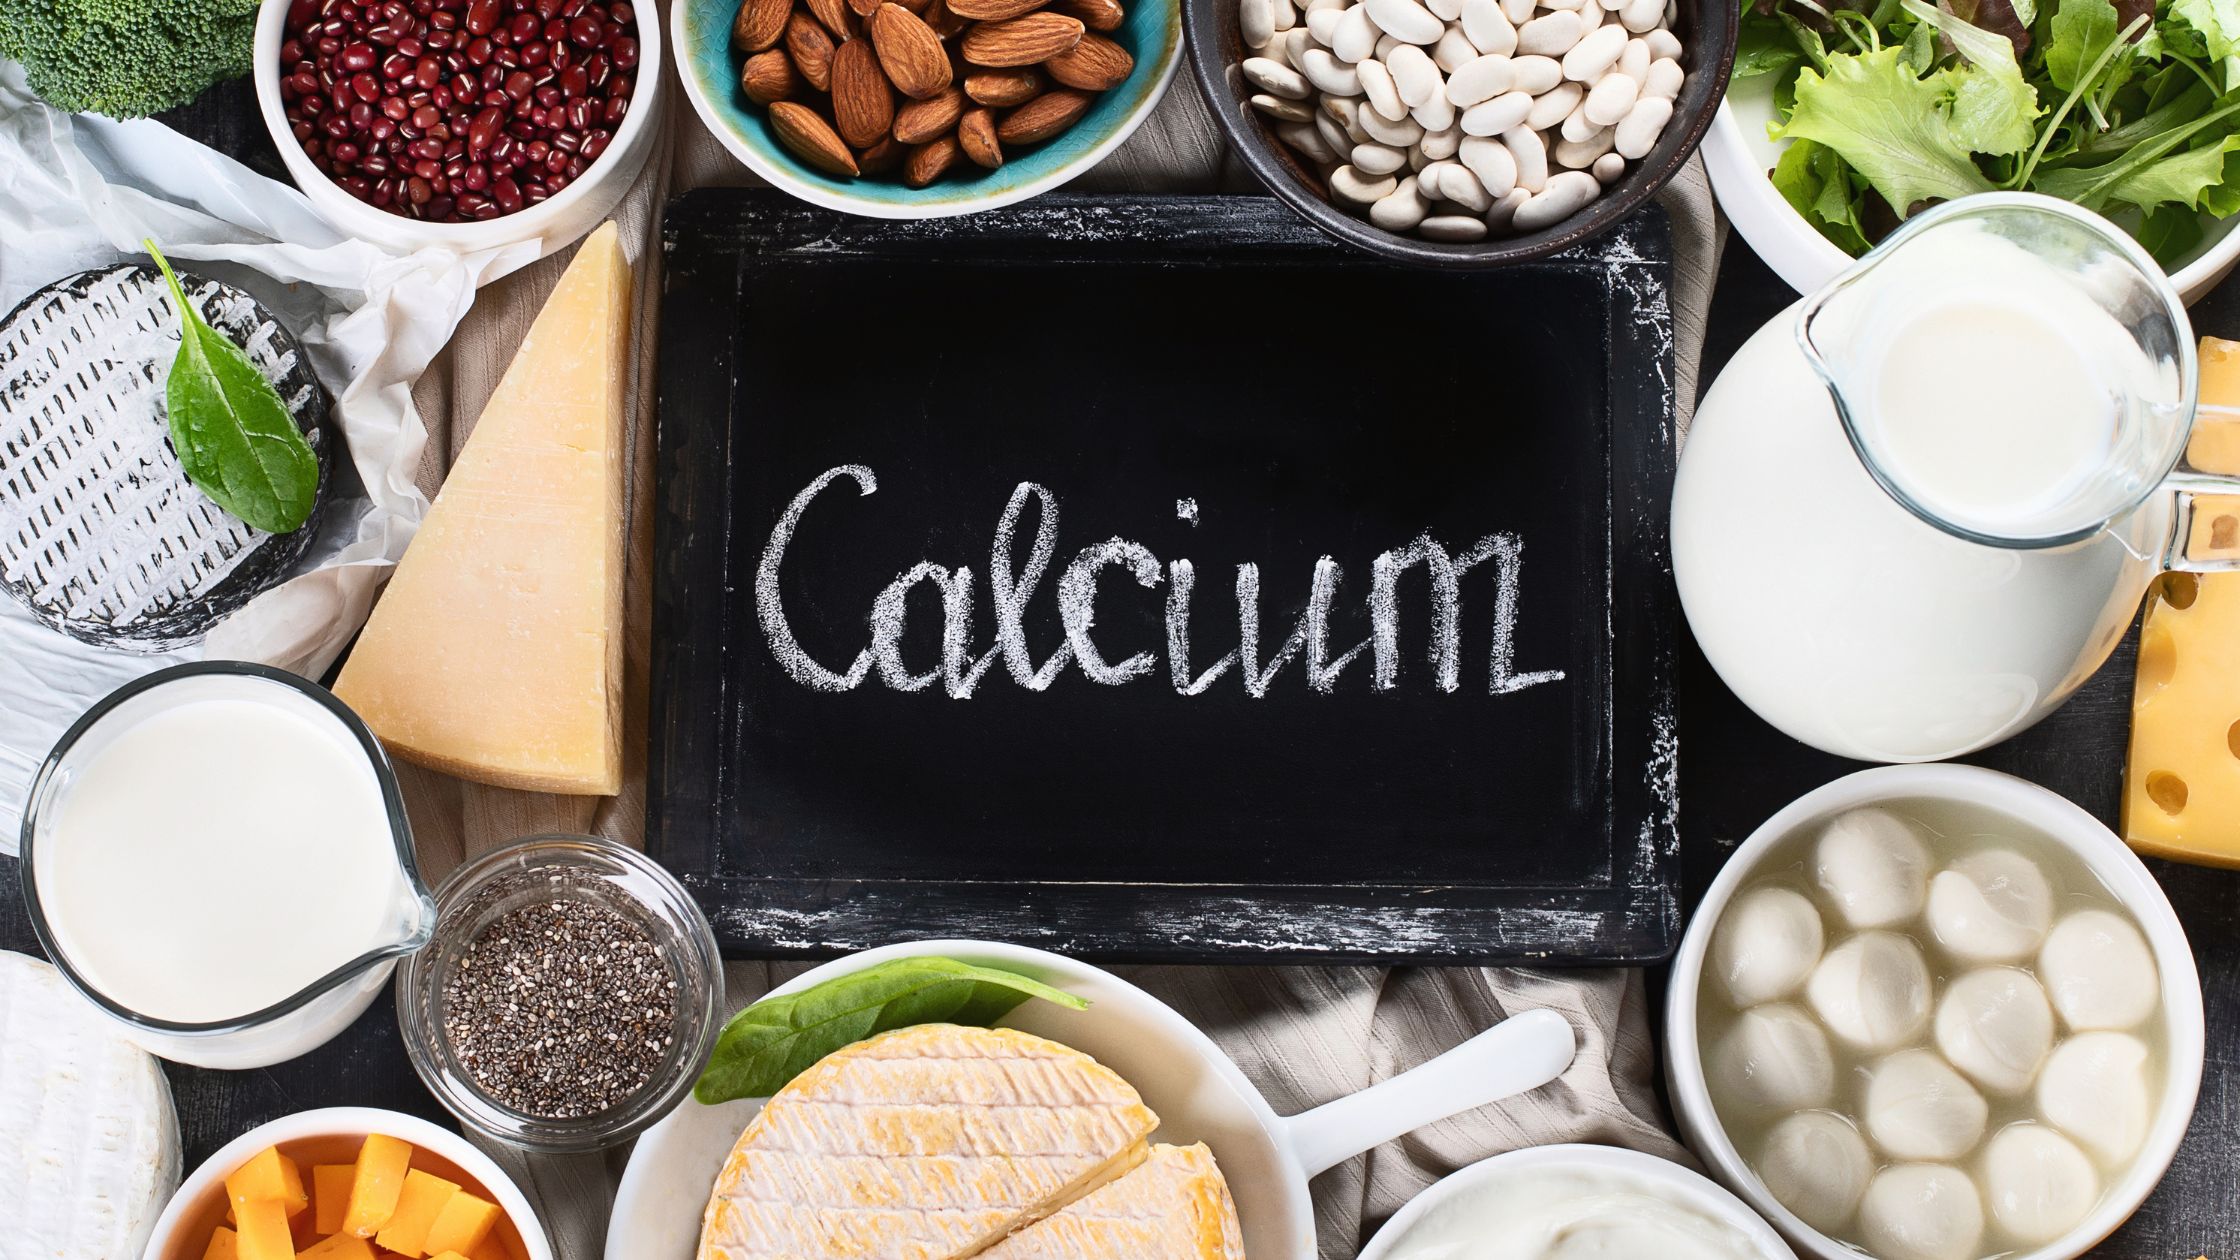 calcium comes from